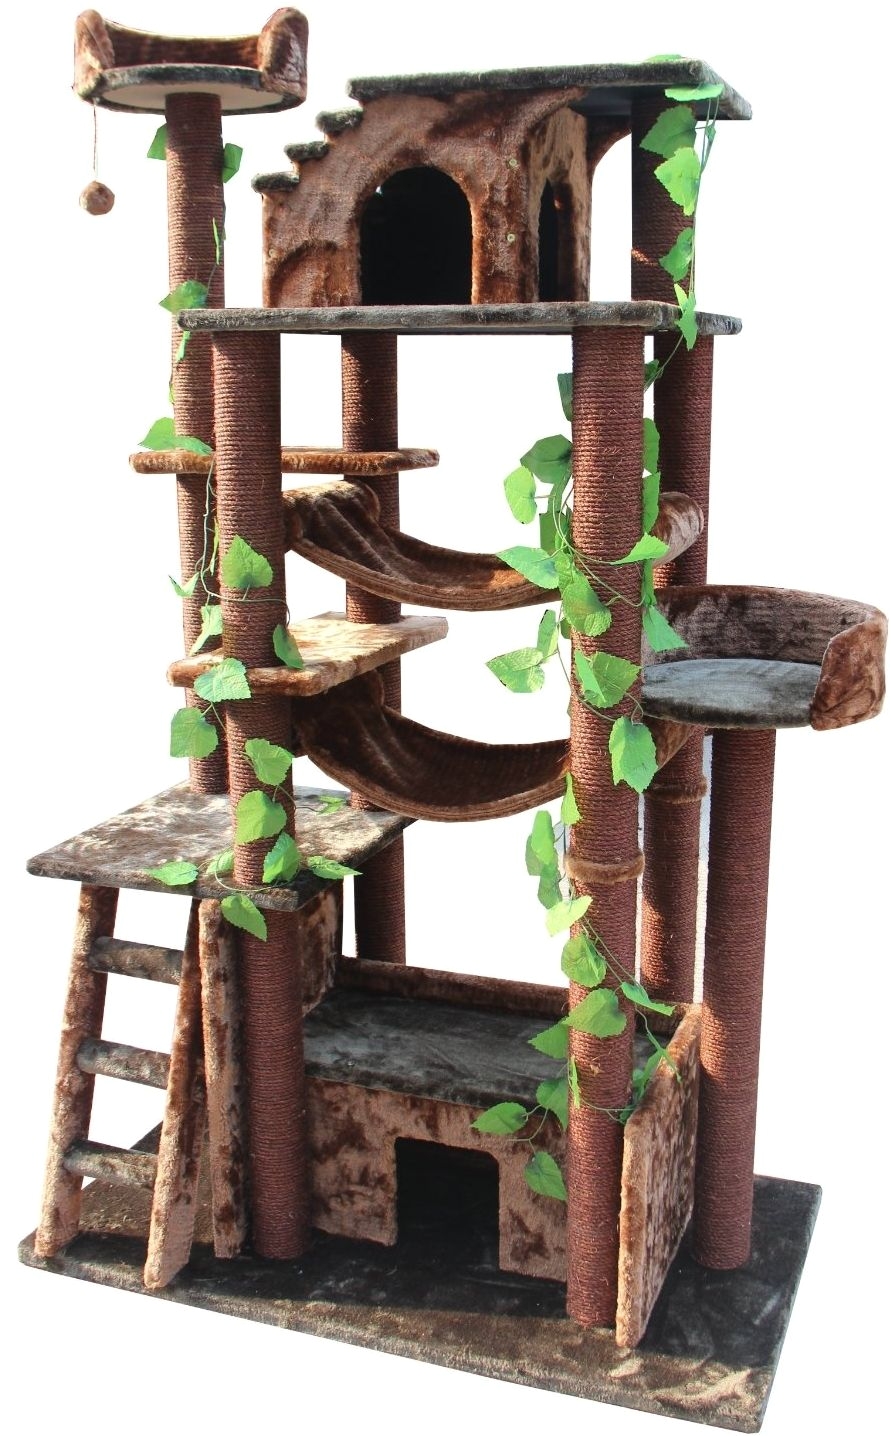 amazon cat tree not spending this kind of money on a cat tree but could possibly decorate a cheaper one or make one myself